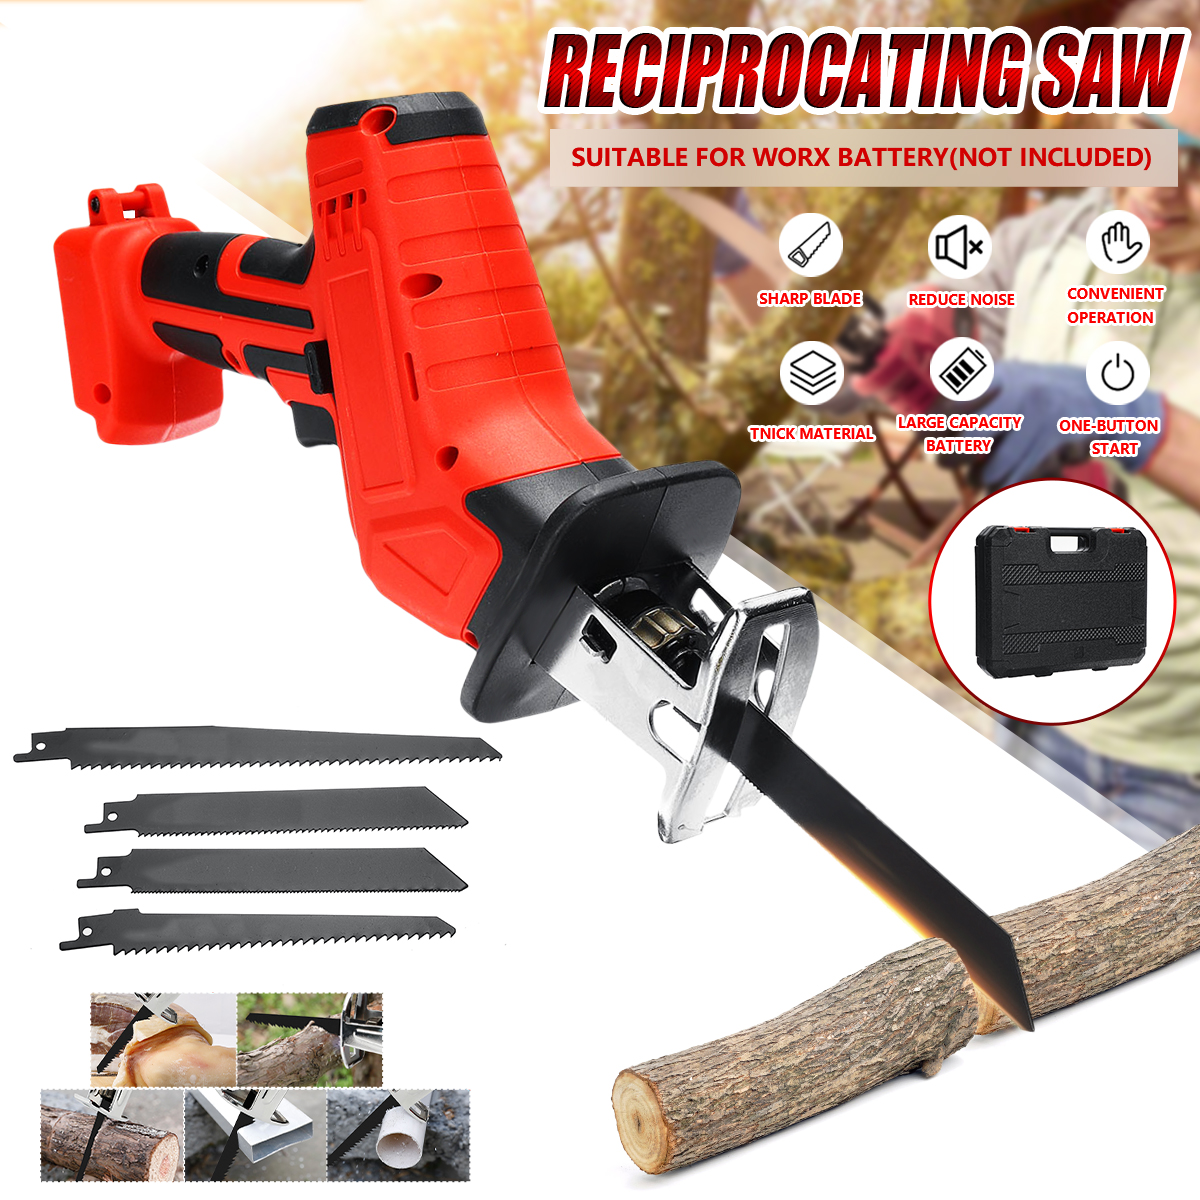 42VF-13000mAh-Cordless-Reciprocating-Saw-Electric-Saws-Portable-Woodworking-Power-Tools-1640981-1